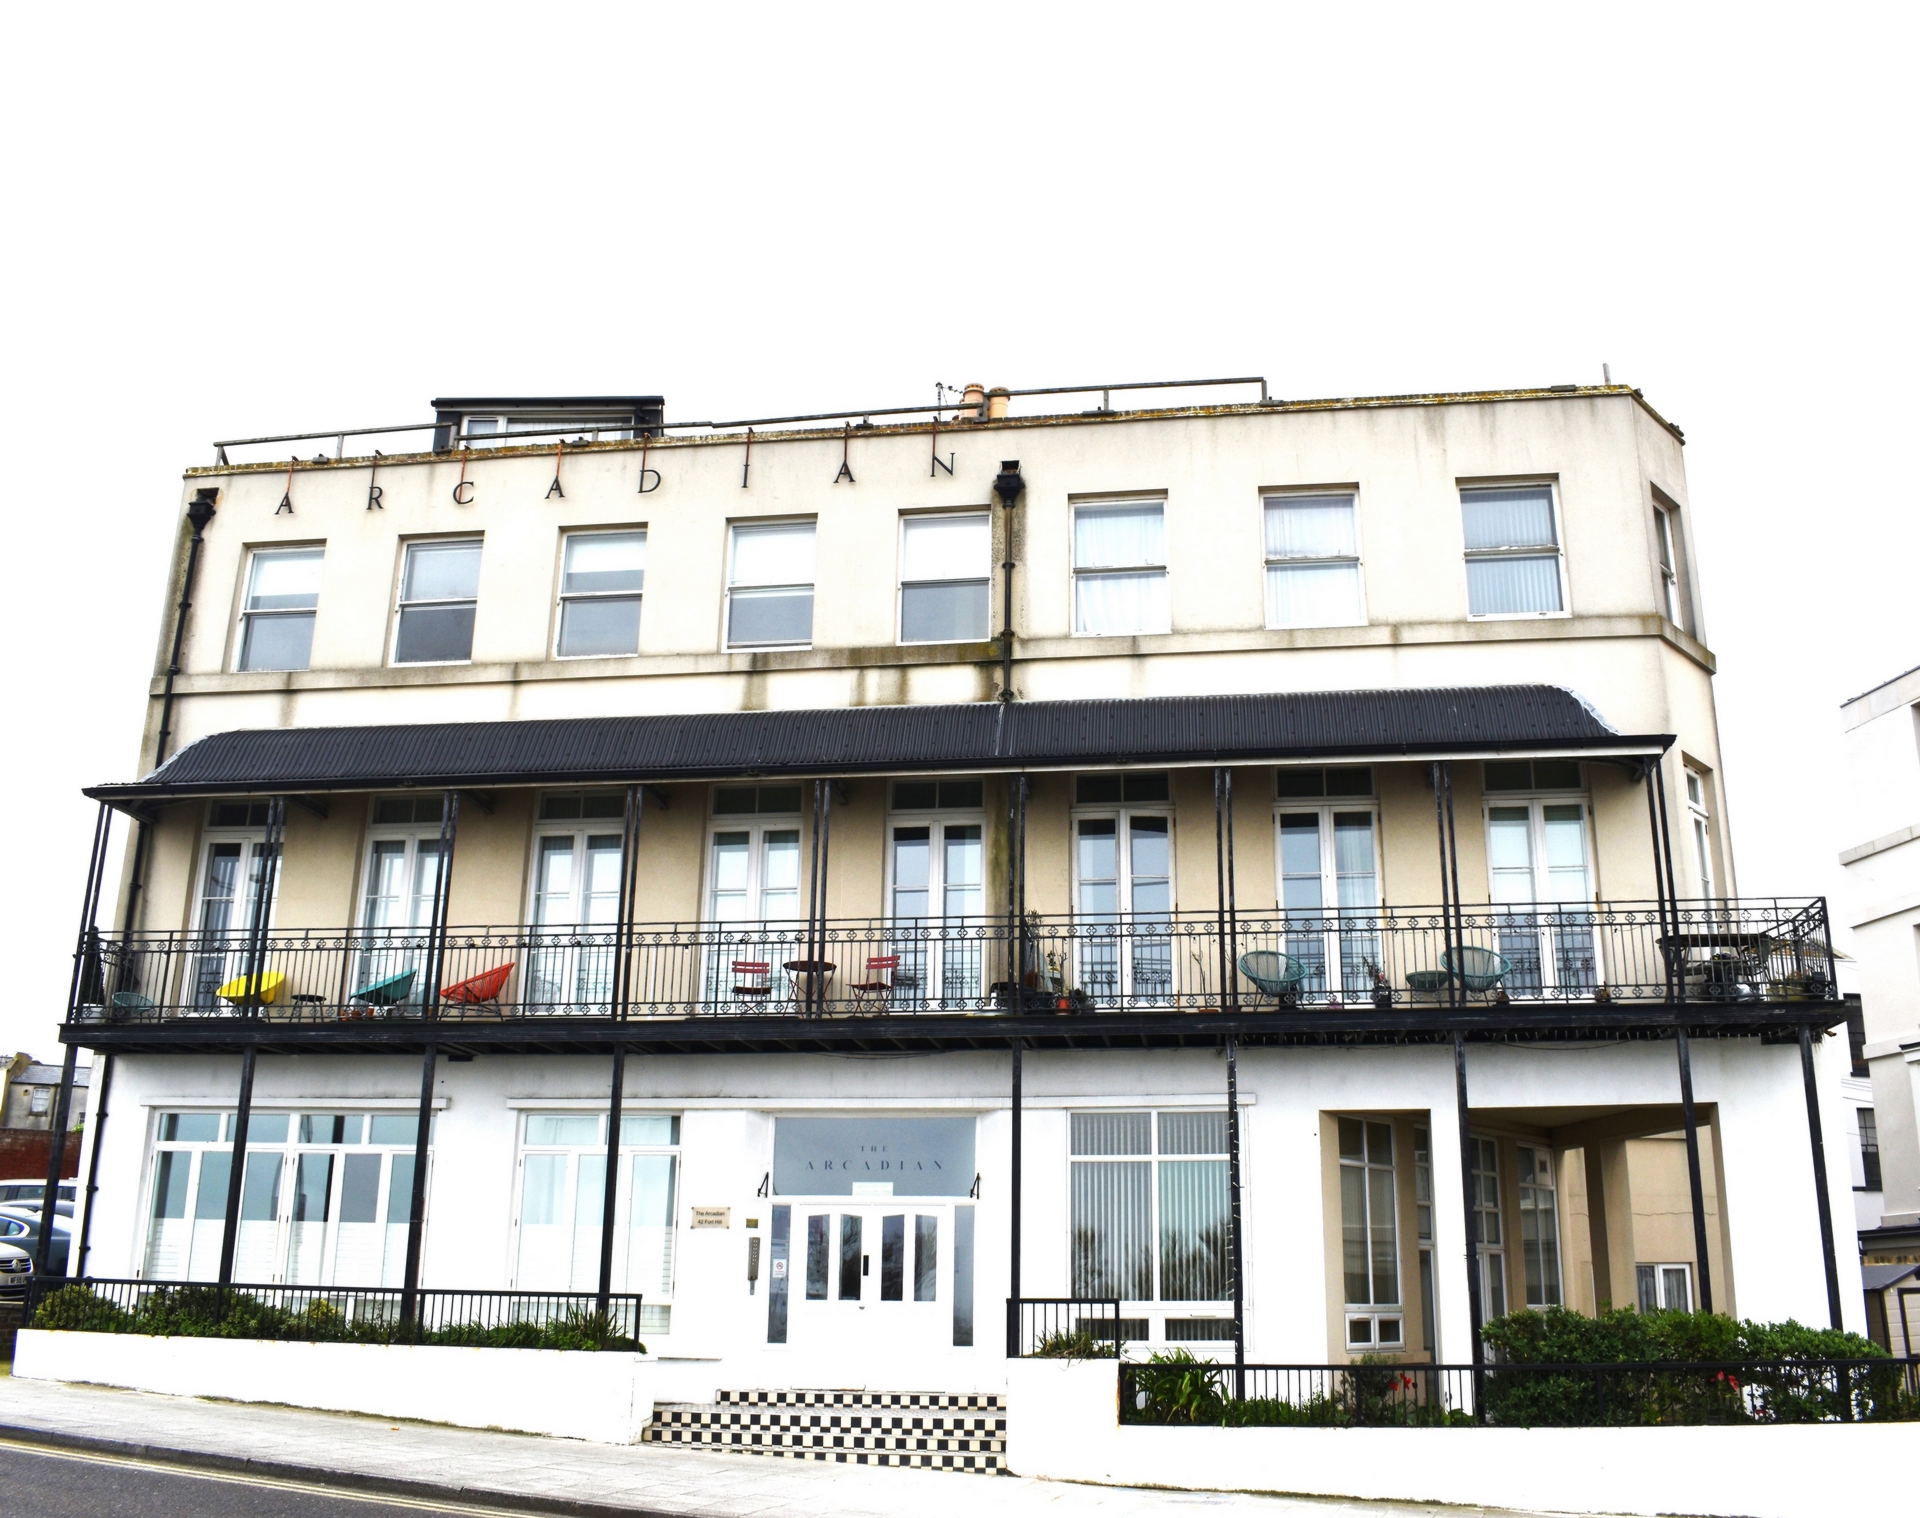 STUNNING **CHAIN FREE** SEA FRONT GROUND FLOOR APARTMENT - LOCATED IN AN ESTABLISHED UPMARKET BLOCK IN PART OF MARGATE'S OLD TOWN.